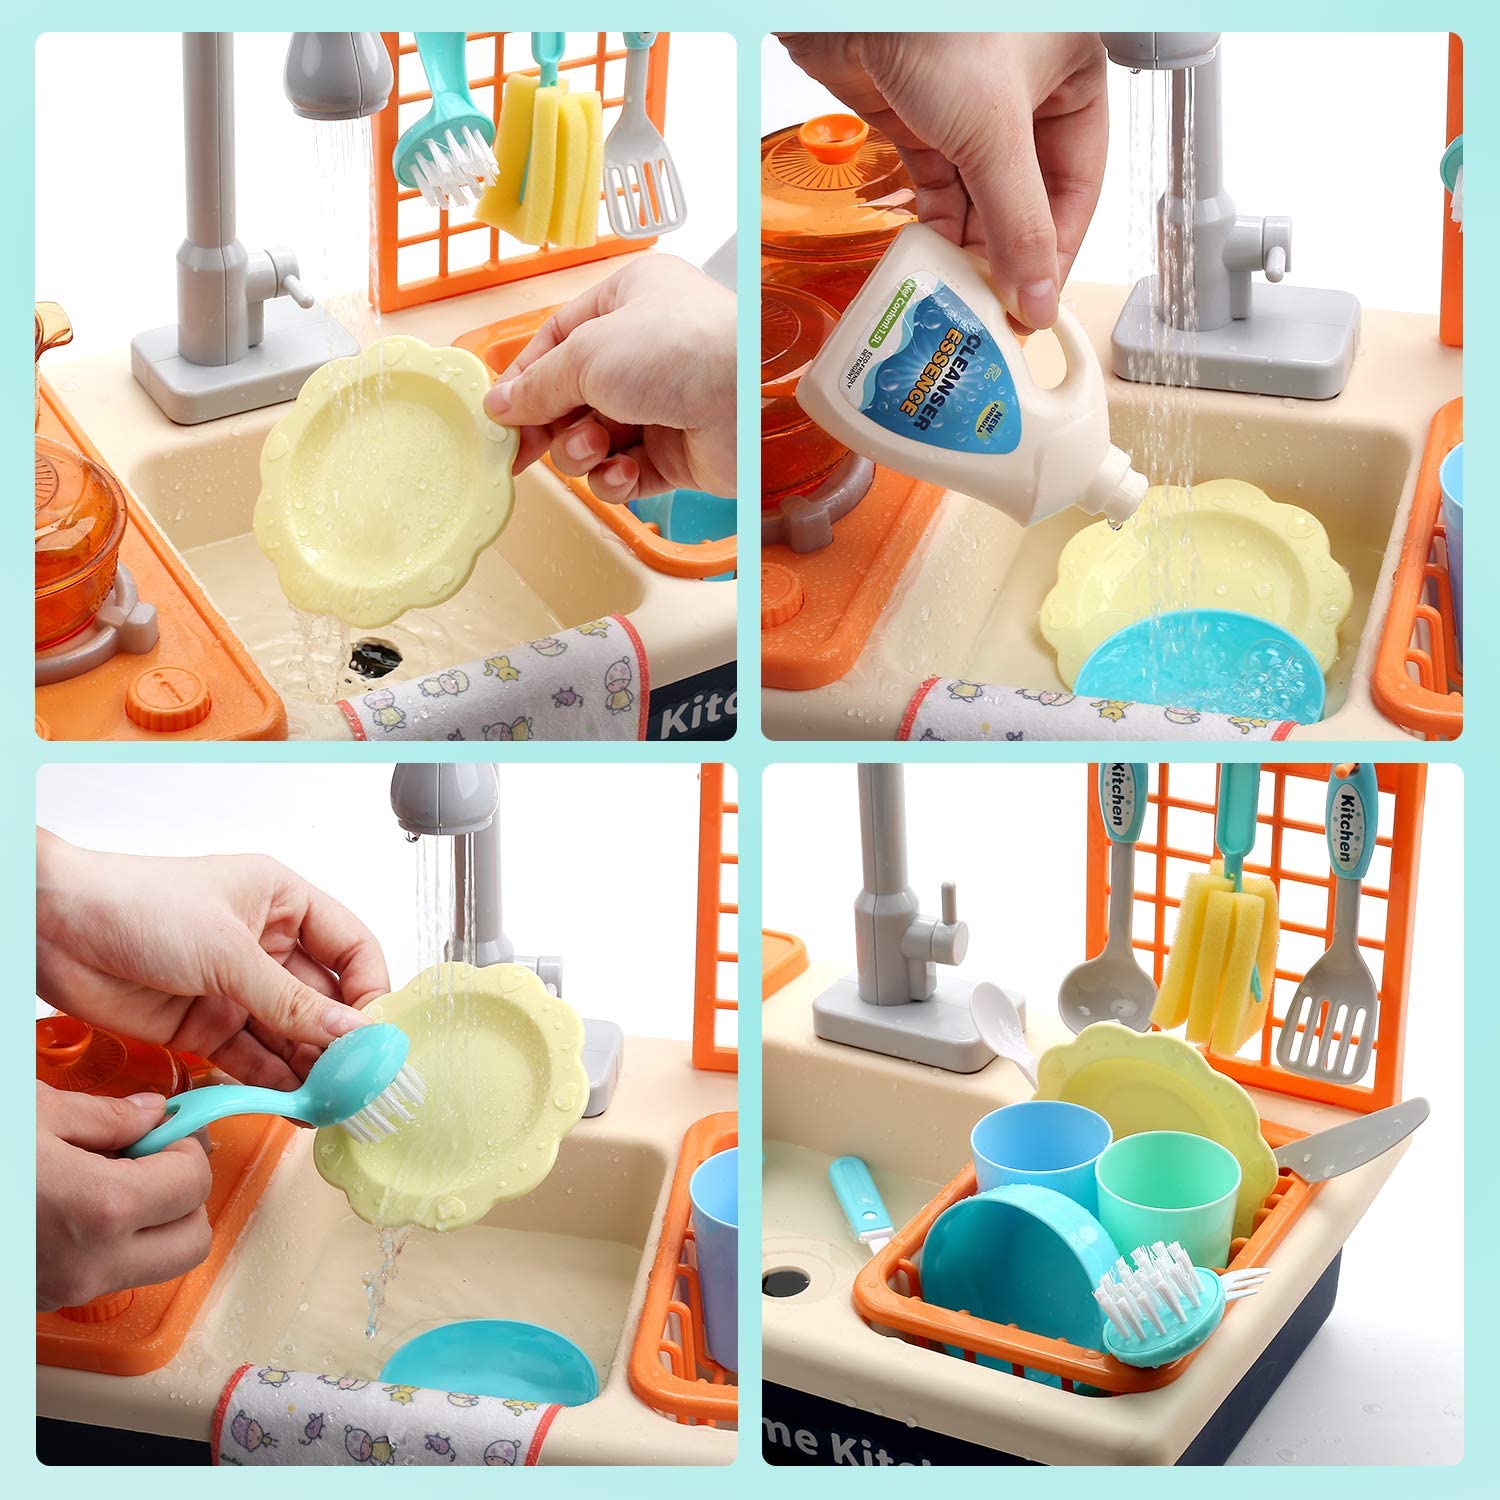 CUTE STONE Pretend Play Kitchen Sink Toys Play Cooking Stove Pot Pan Tableware